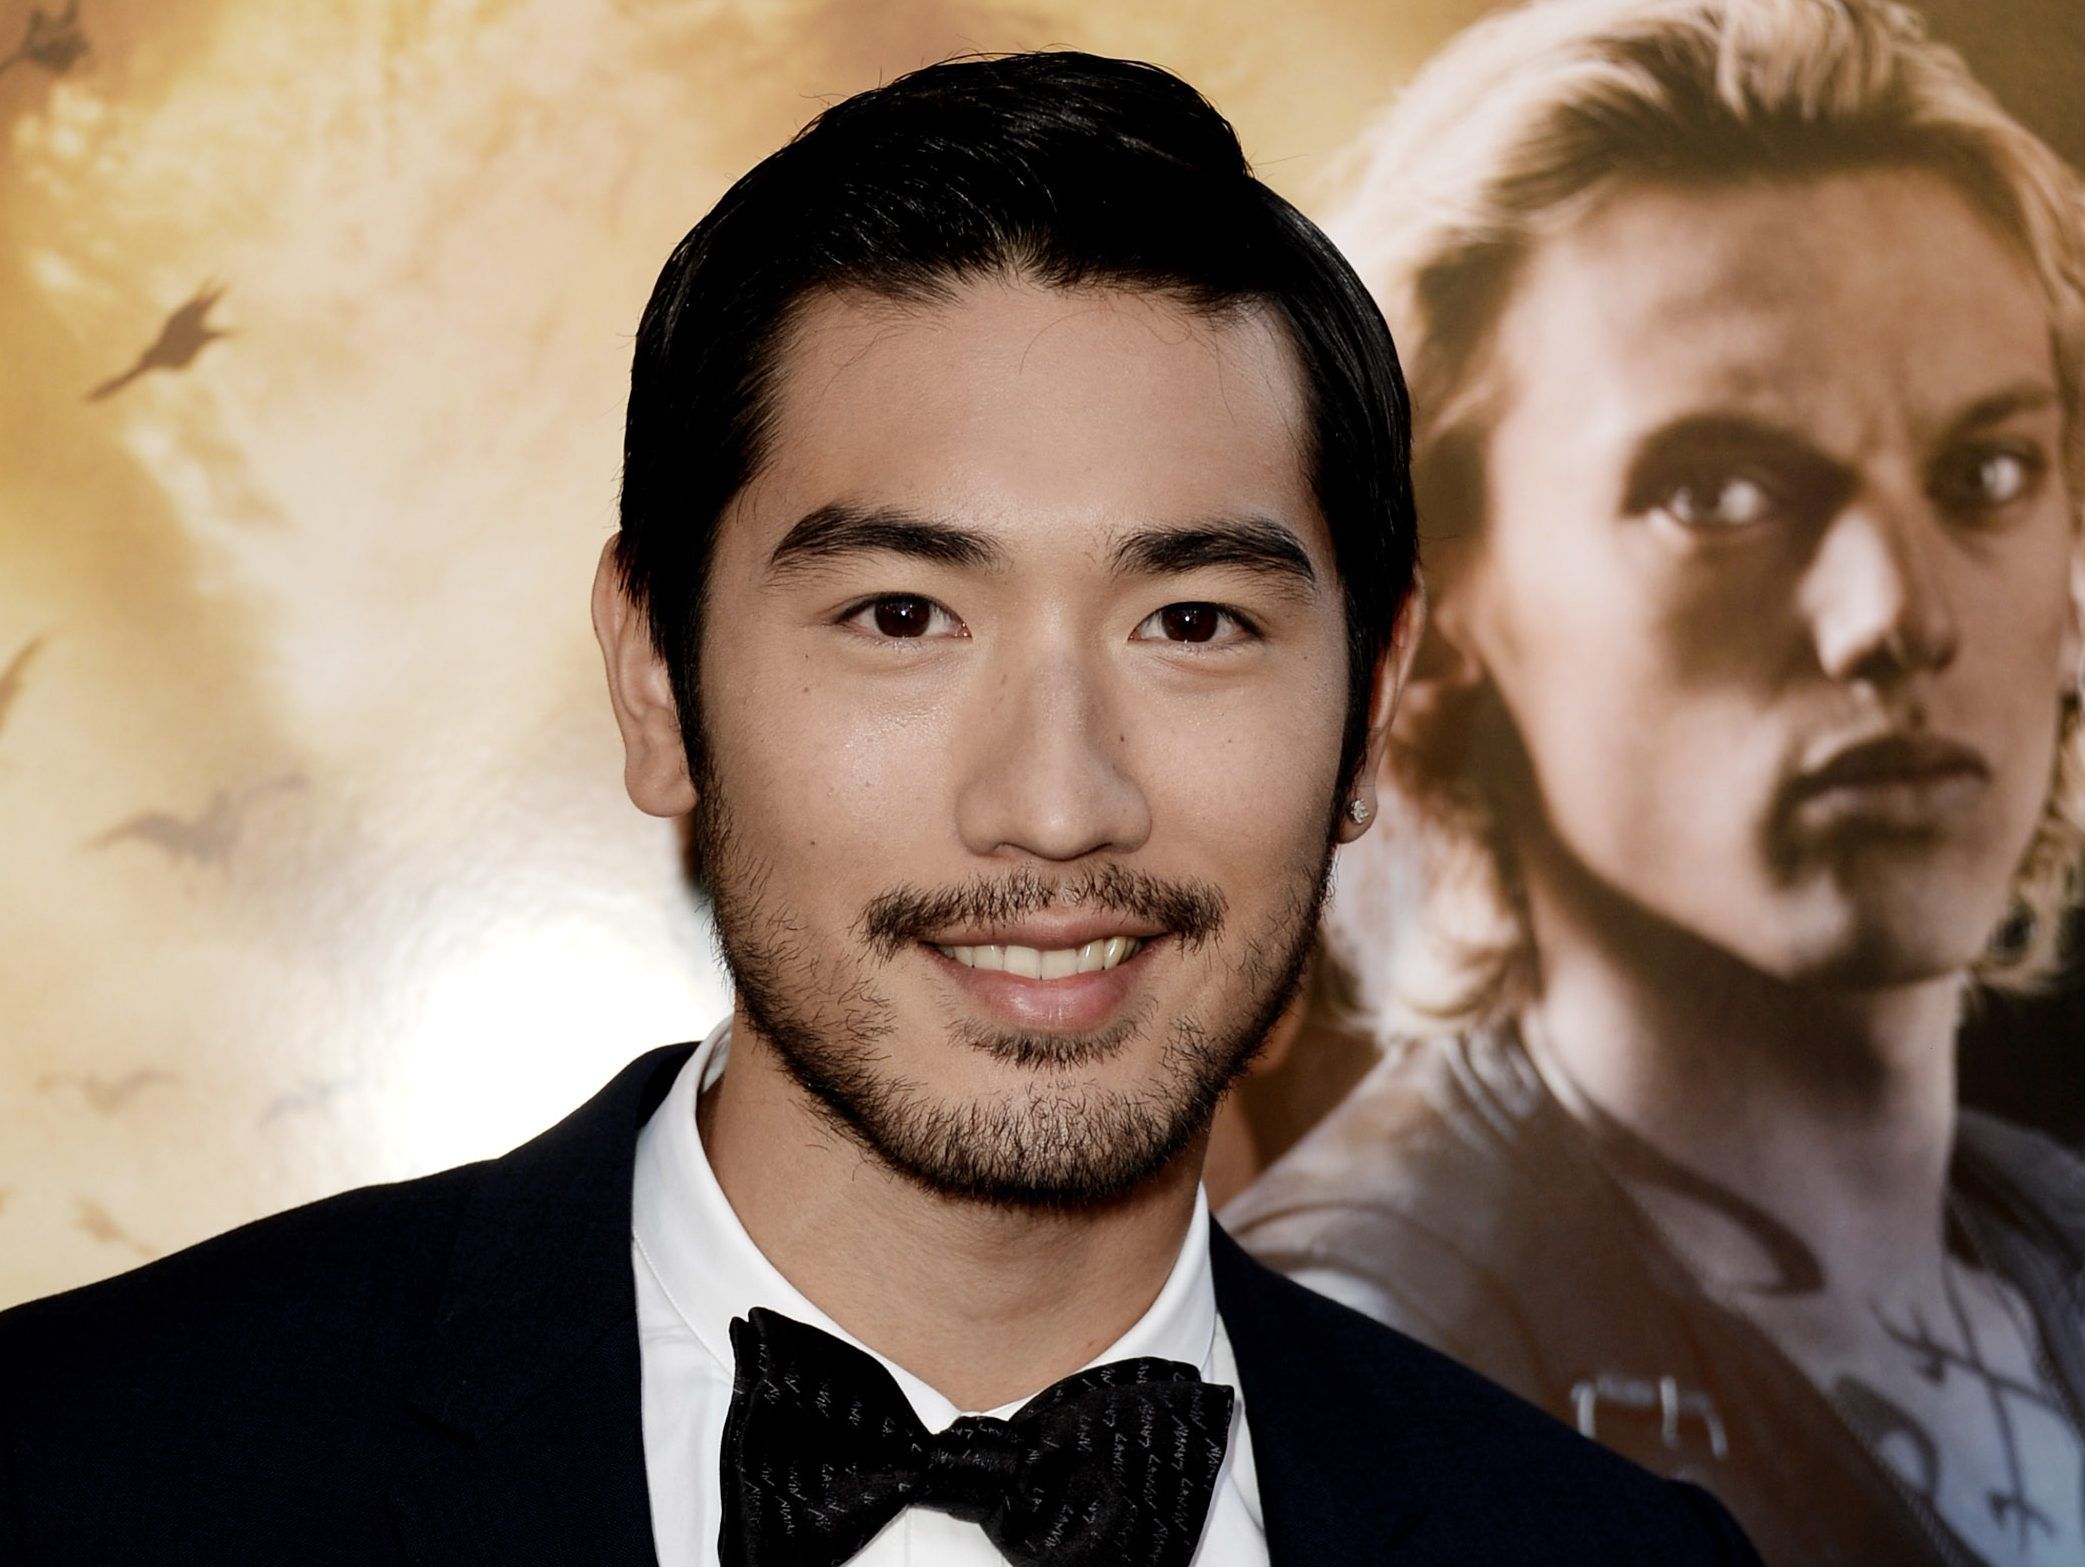 Mortal Instruments' actor Godfrey Gao dies after collapsing on set. North Bay Nugget